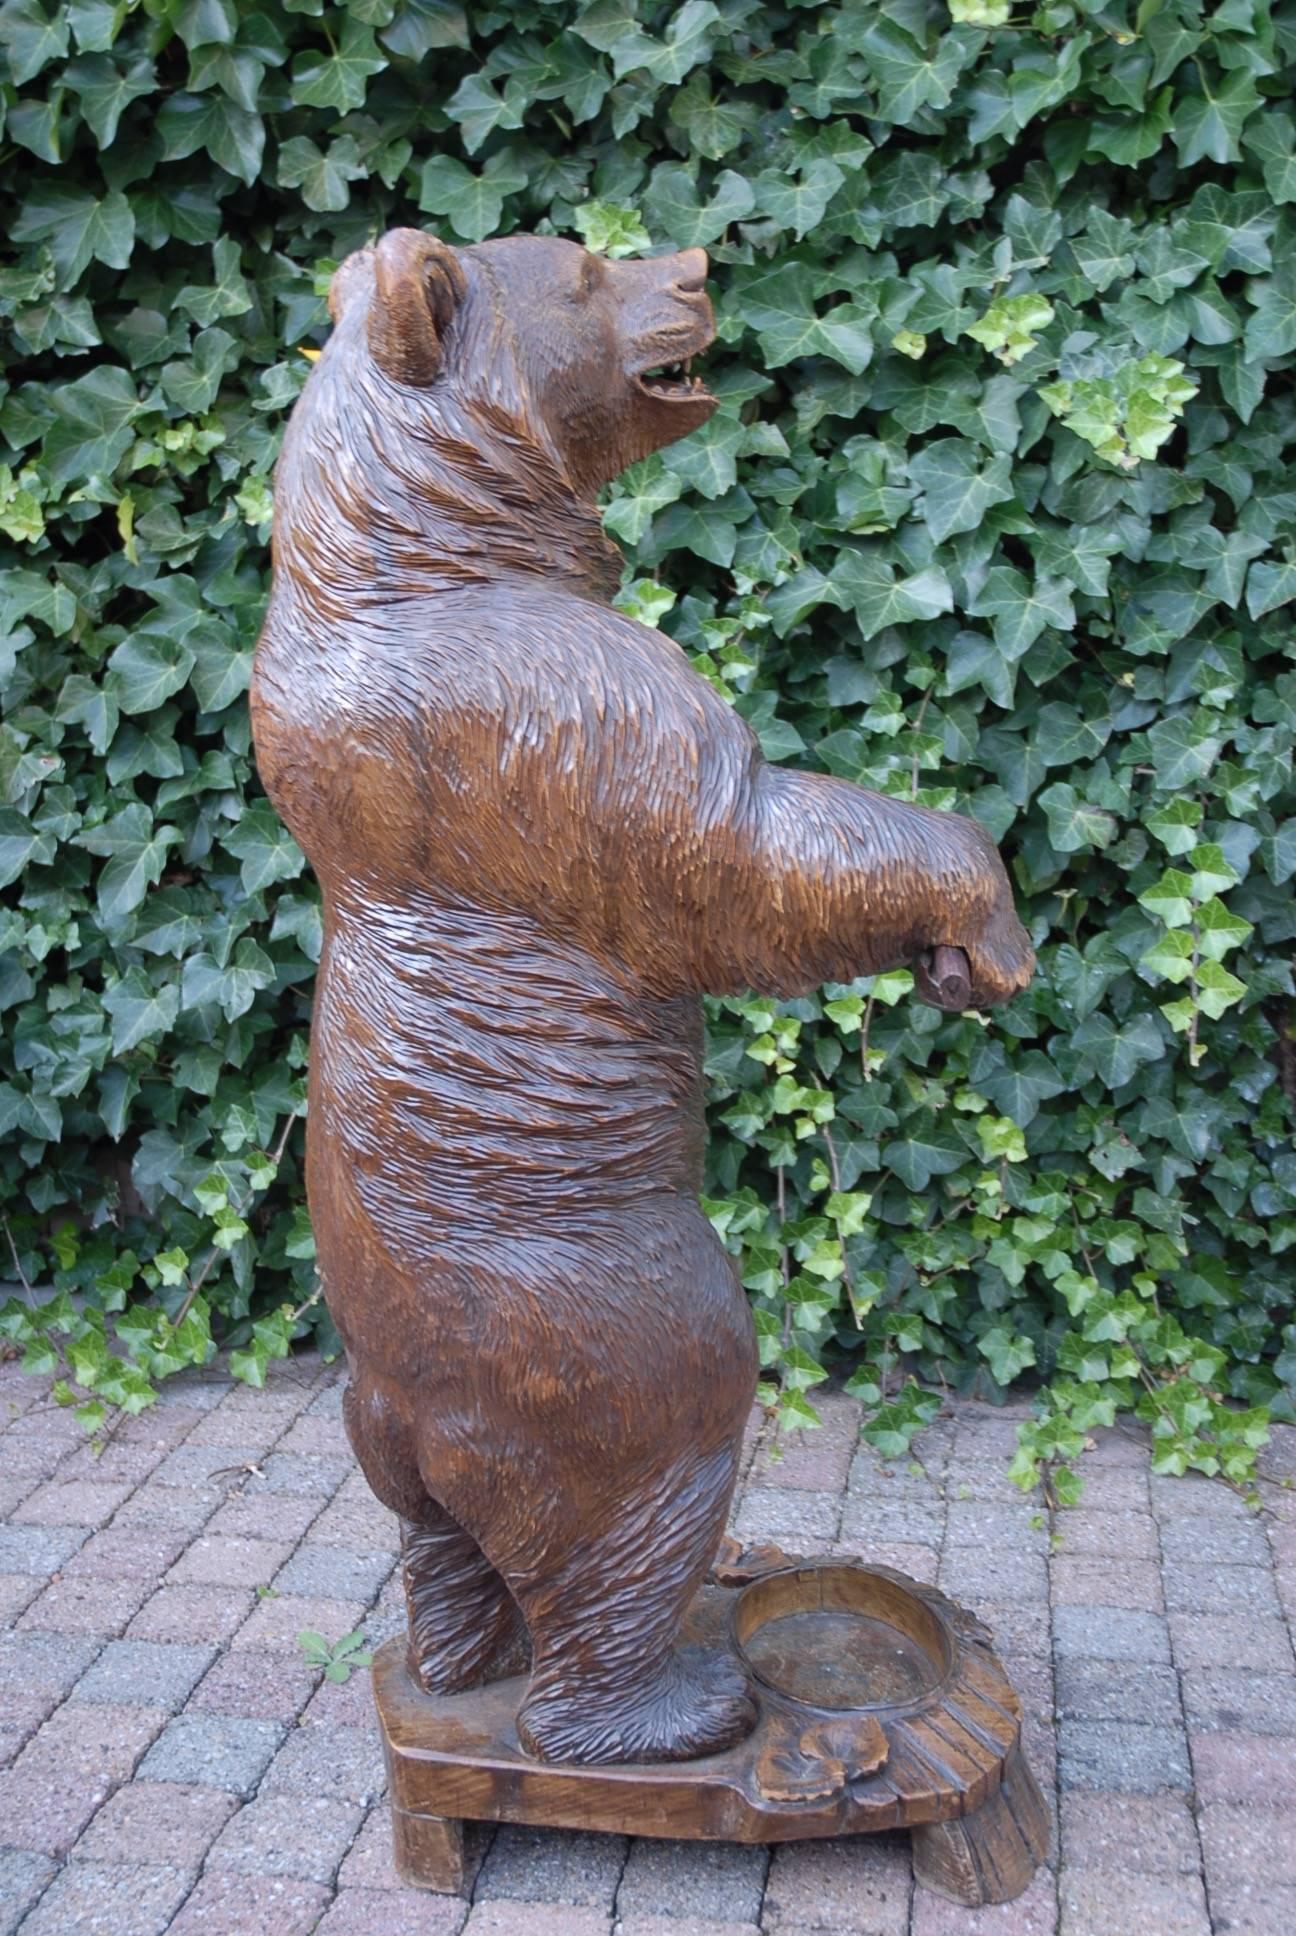 Antique and stunning Black Forest umbrella stand.

This perfect example of Swiss Black Forest craftsmanship is an absolute joy to behold. Only the best were capable of creating this kind of realistic bear sculptures and over the years this finest of